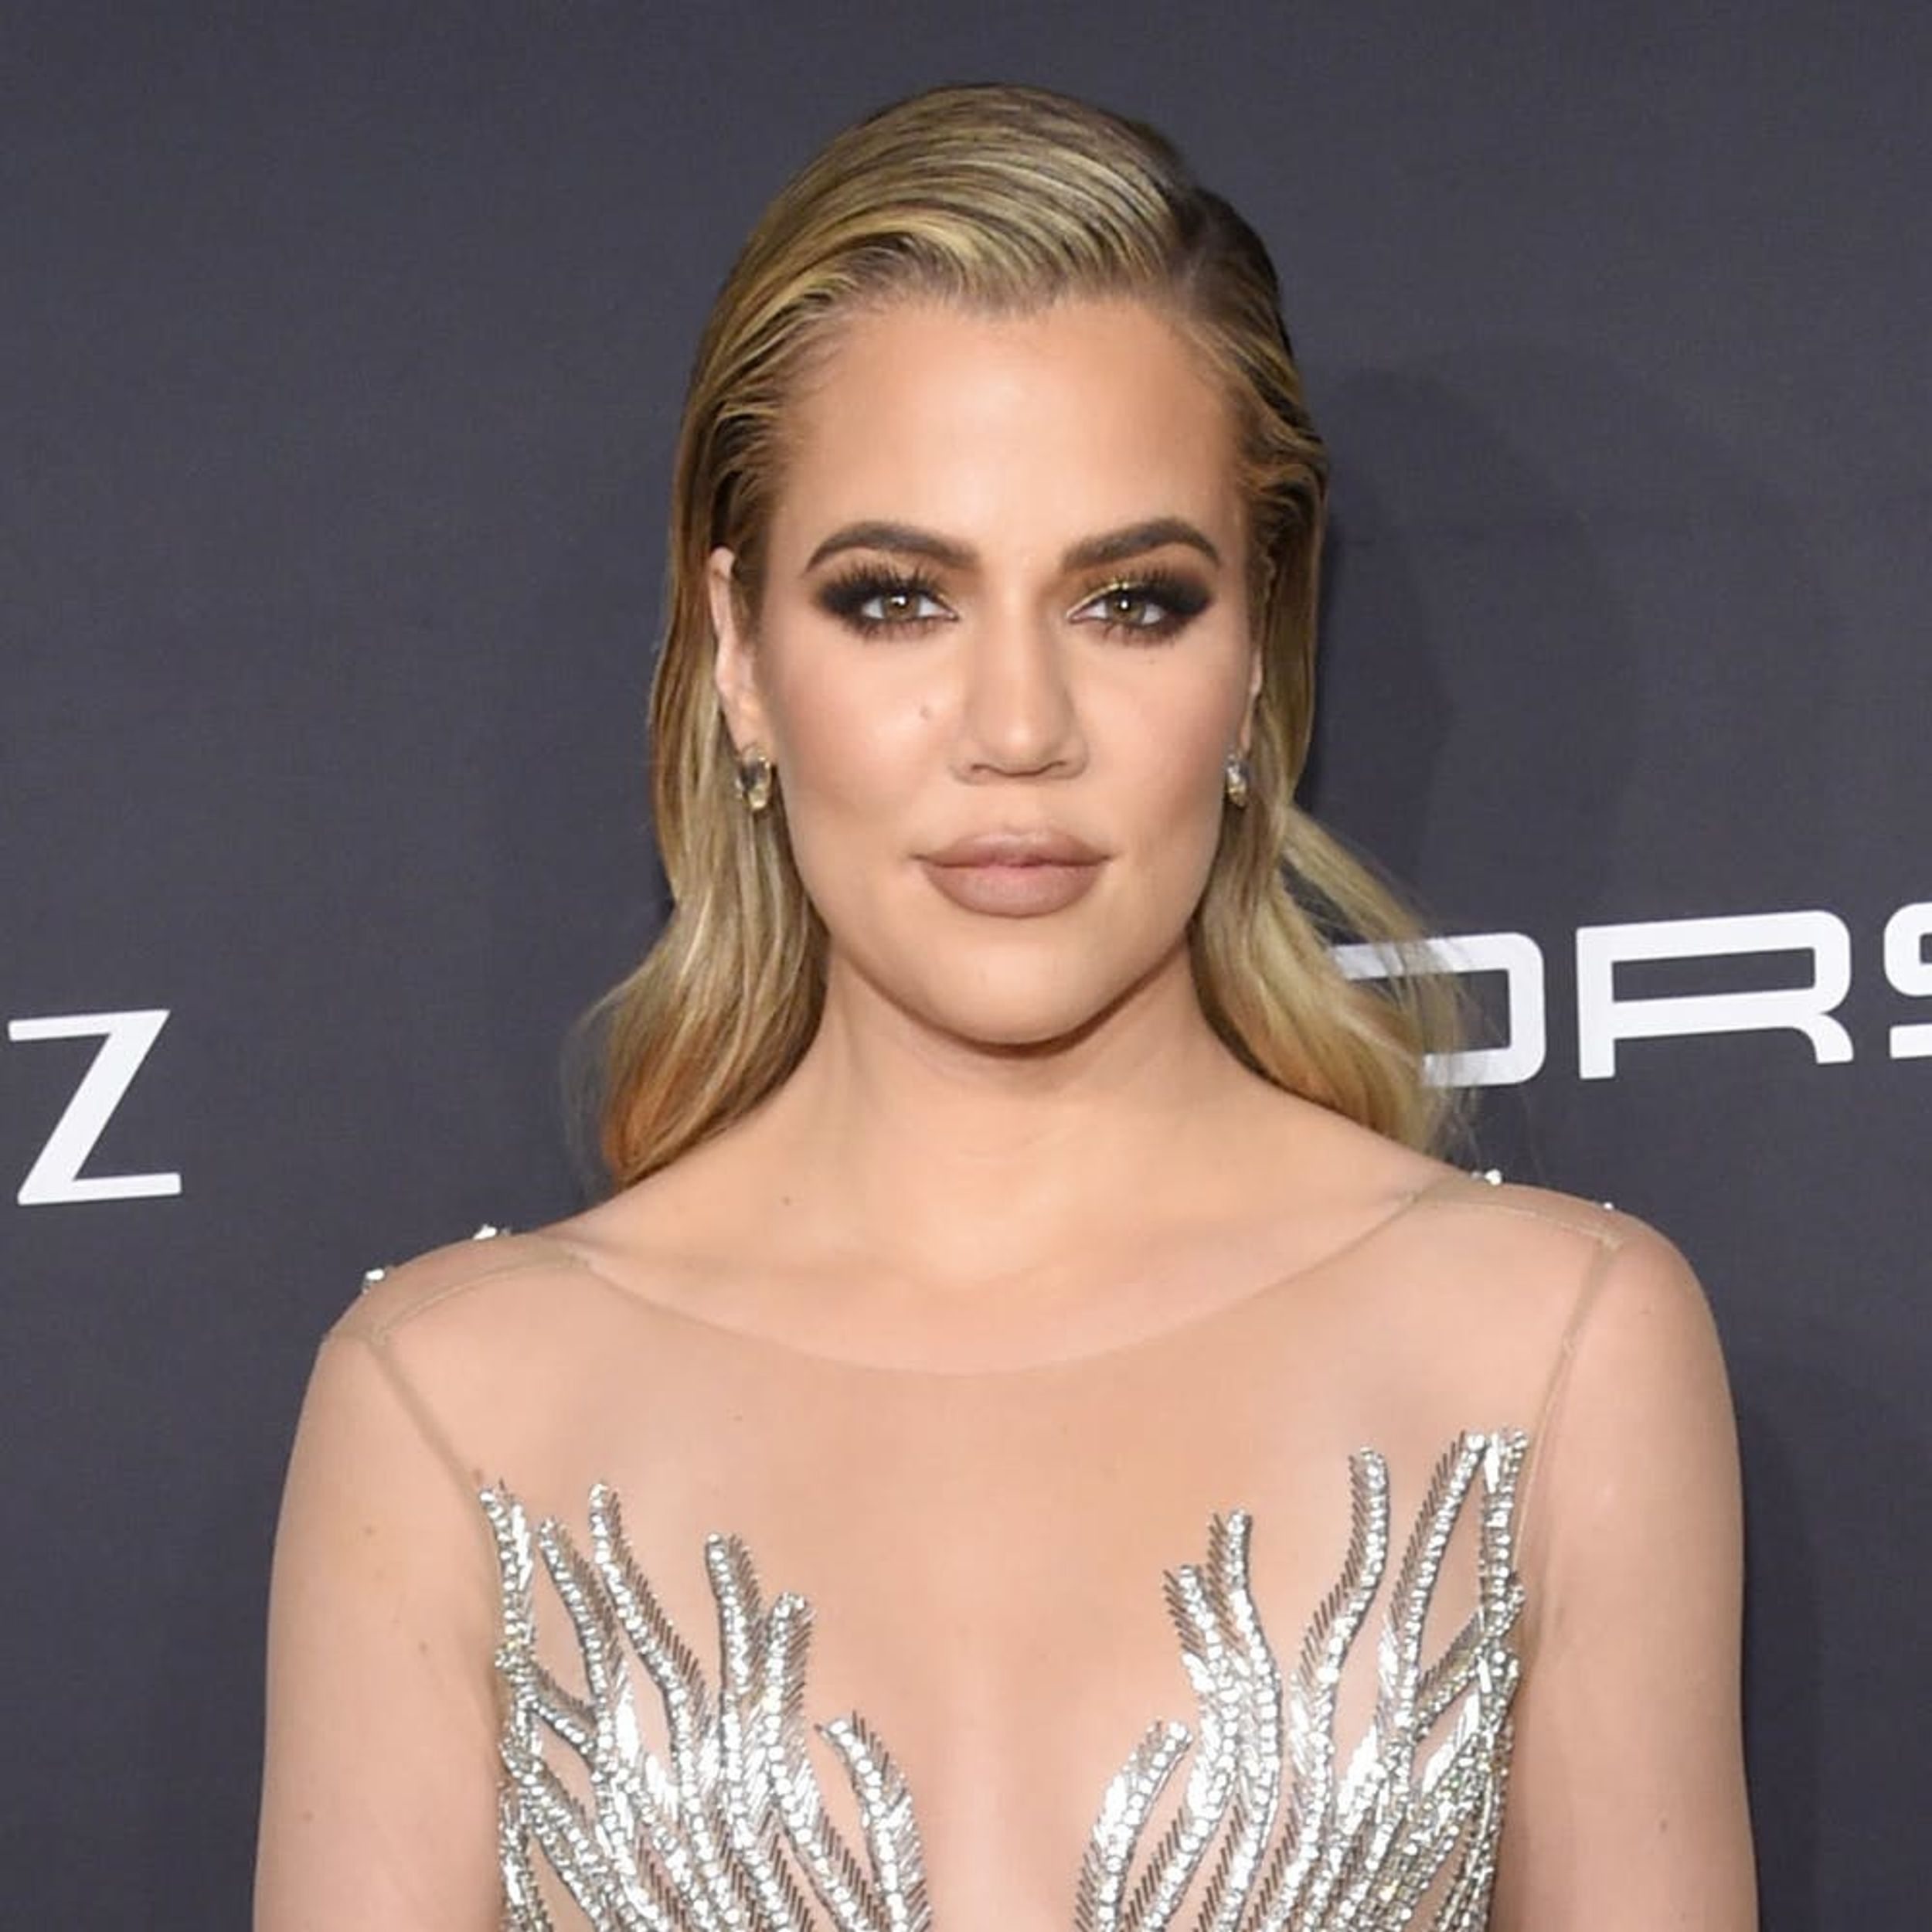 This Is the Major Diet Change Khloé Kardashian Is Making While Pregnant